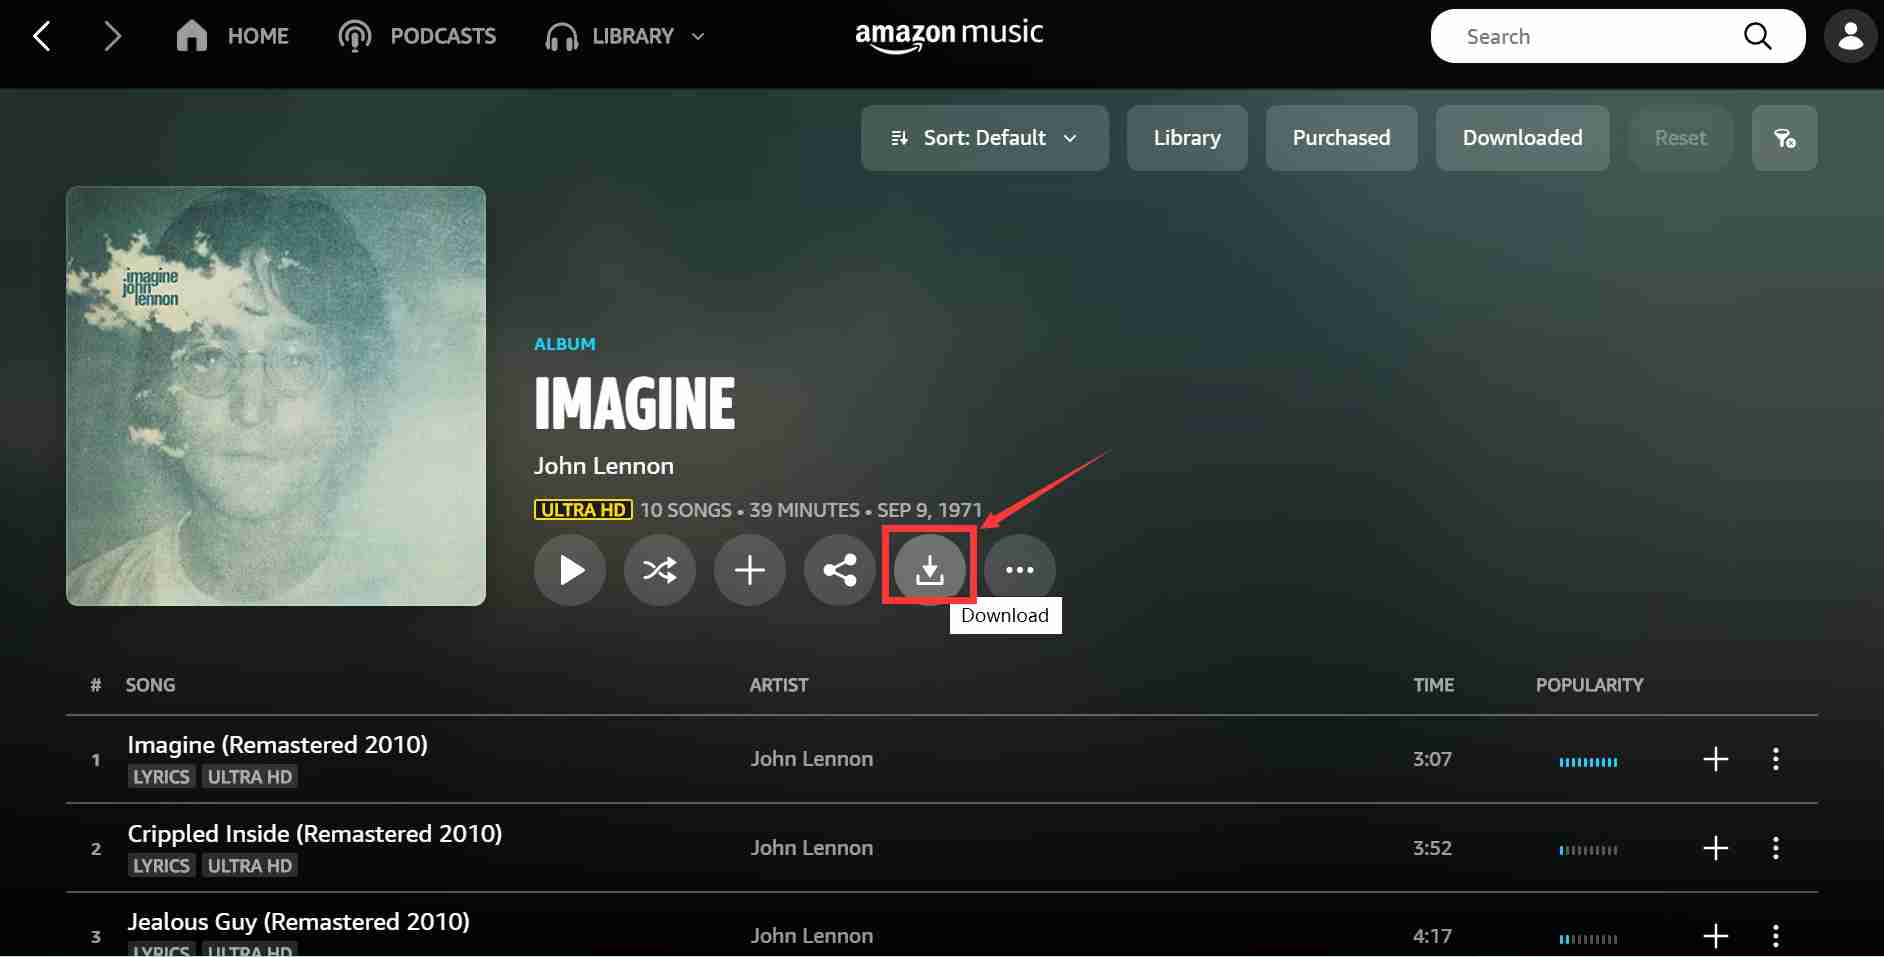 Download The Amazon Music You Want to Burn to CD